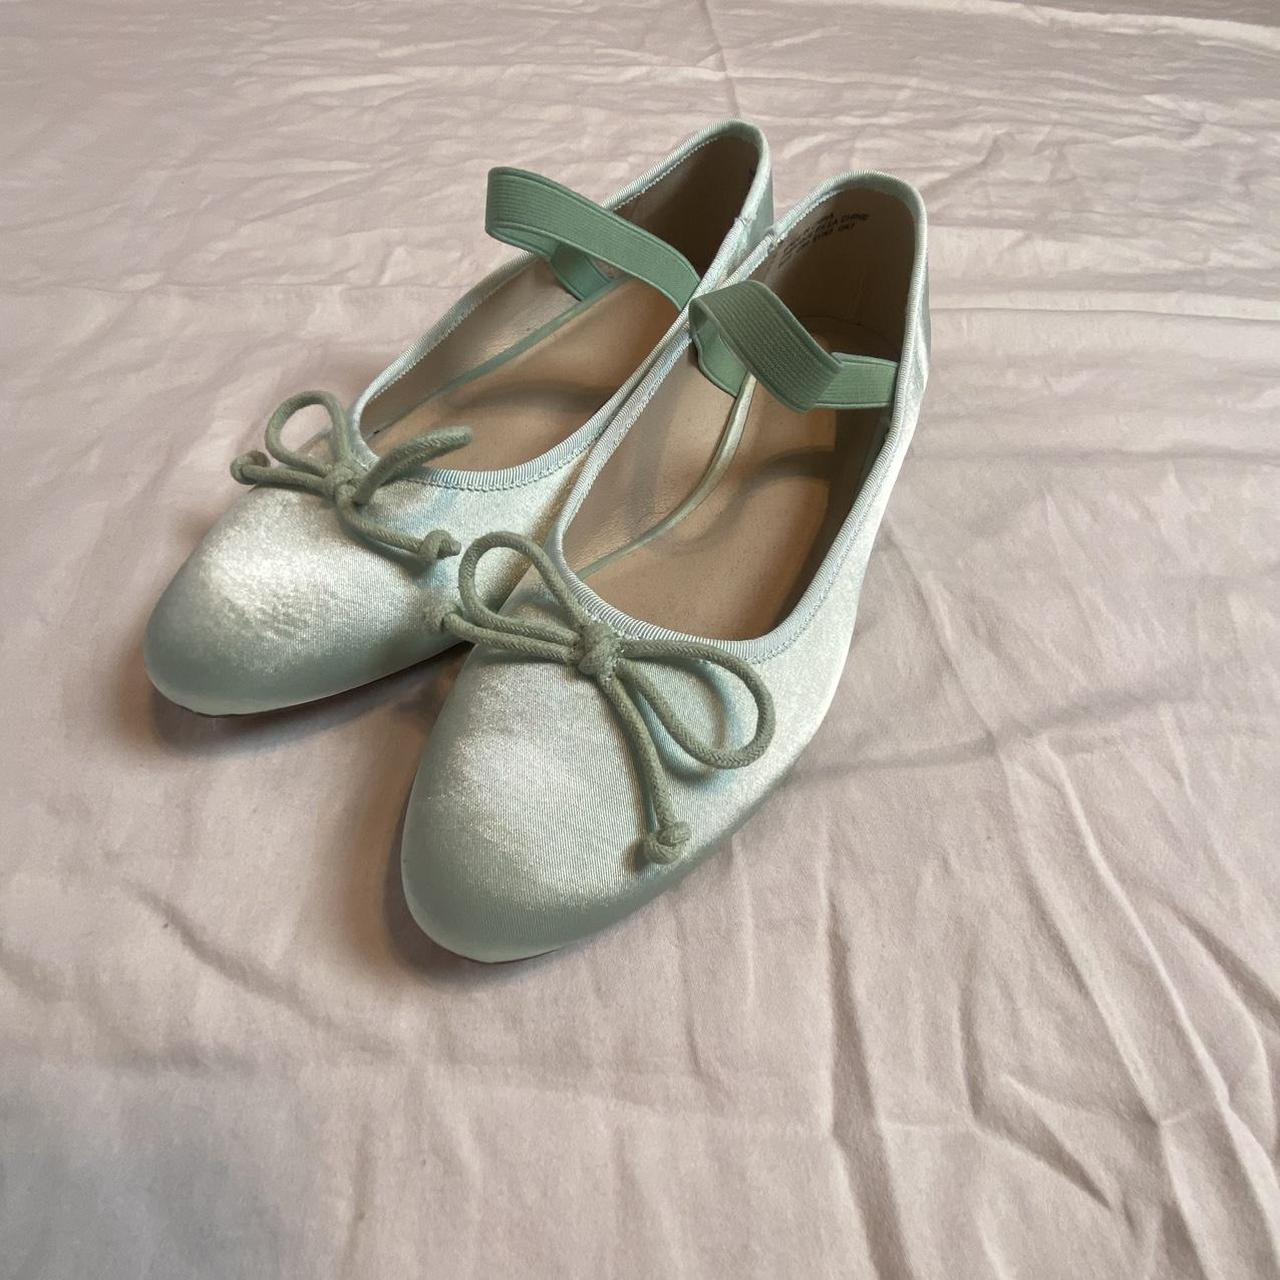 Urban Outfitters Women's Ballet-shoes